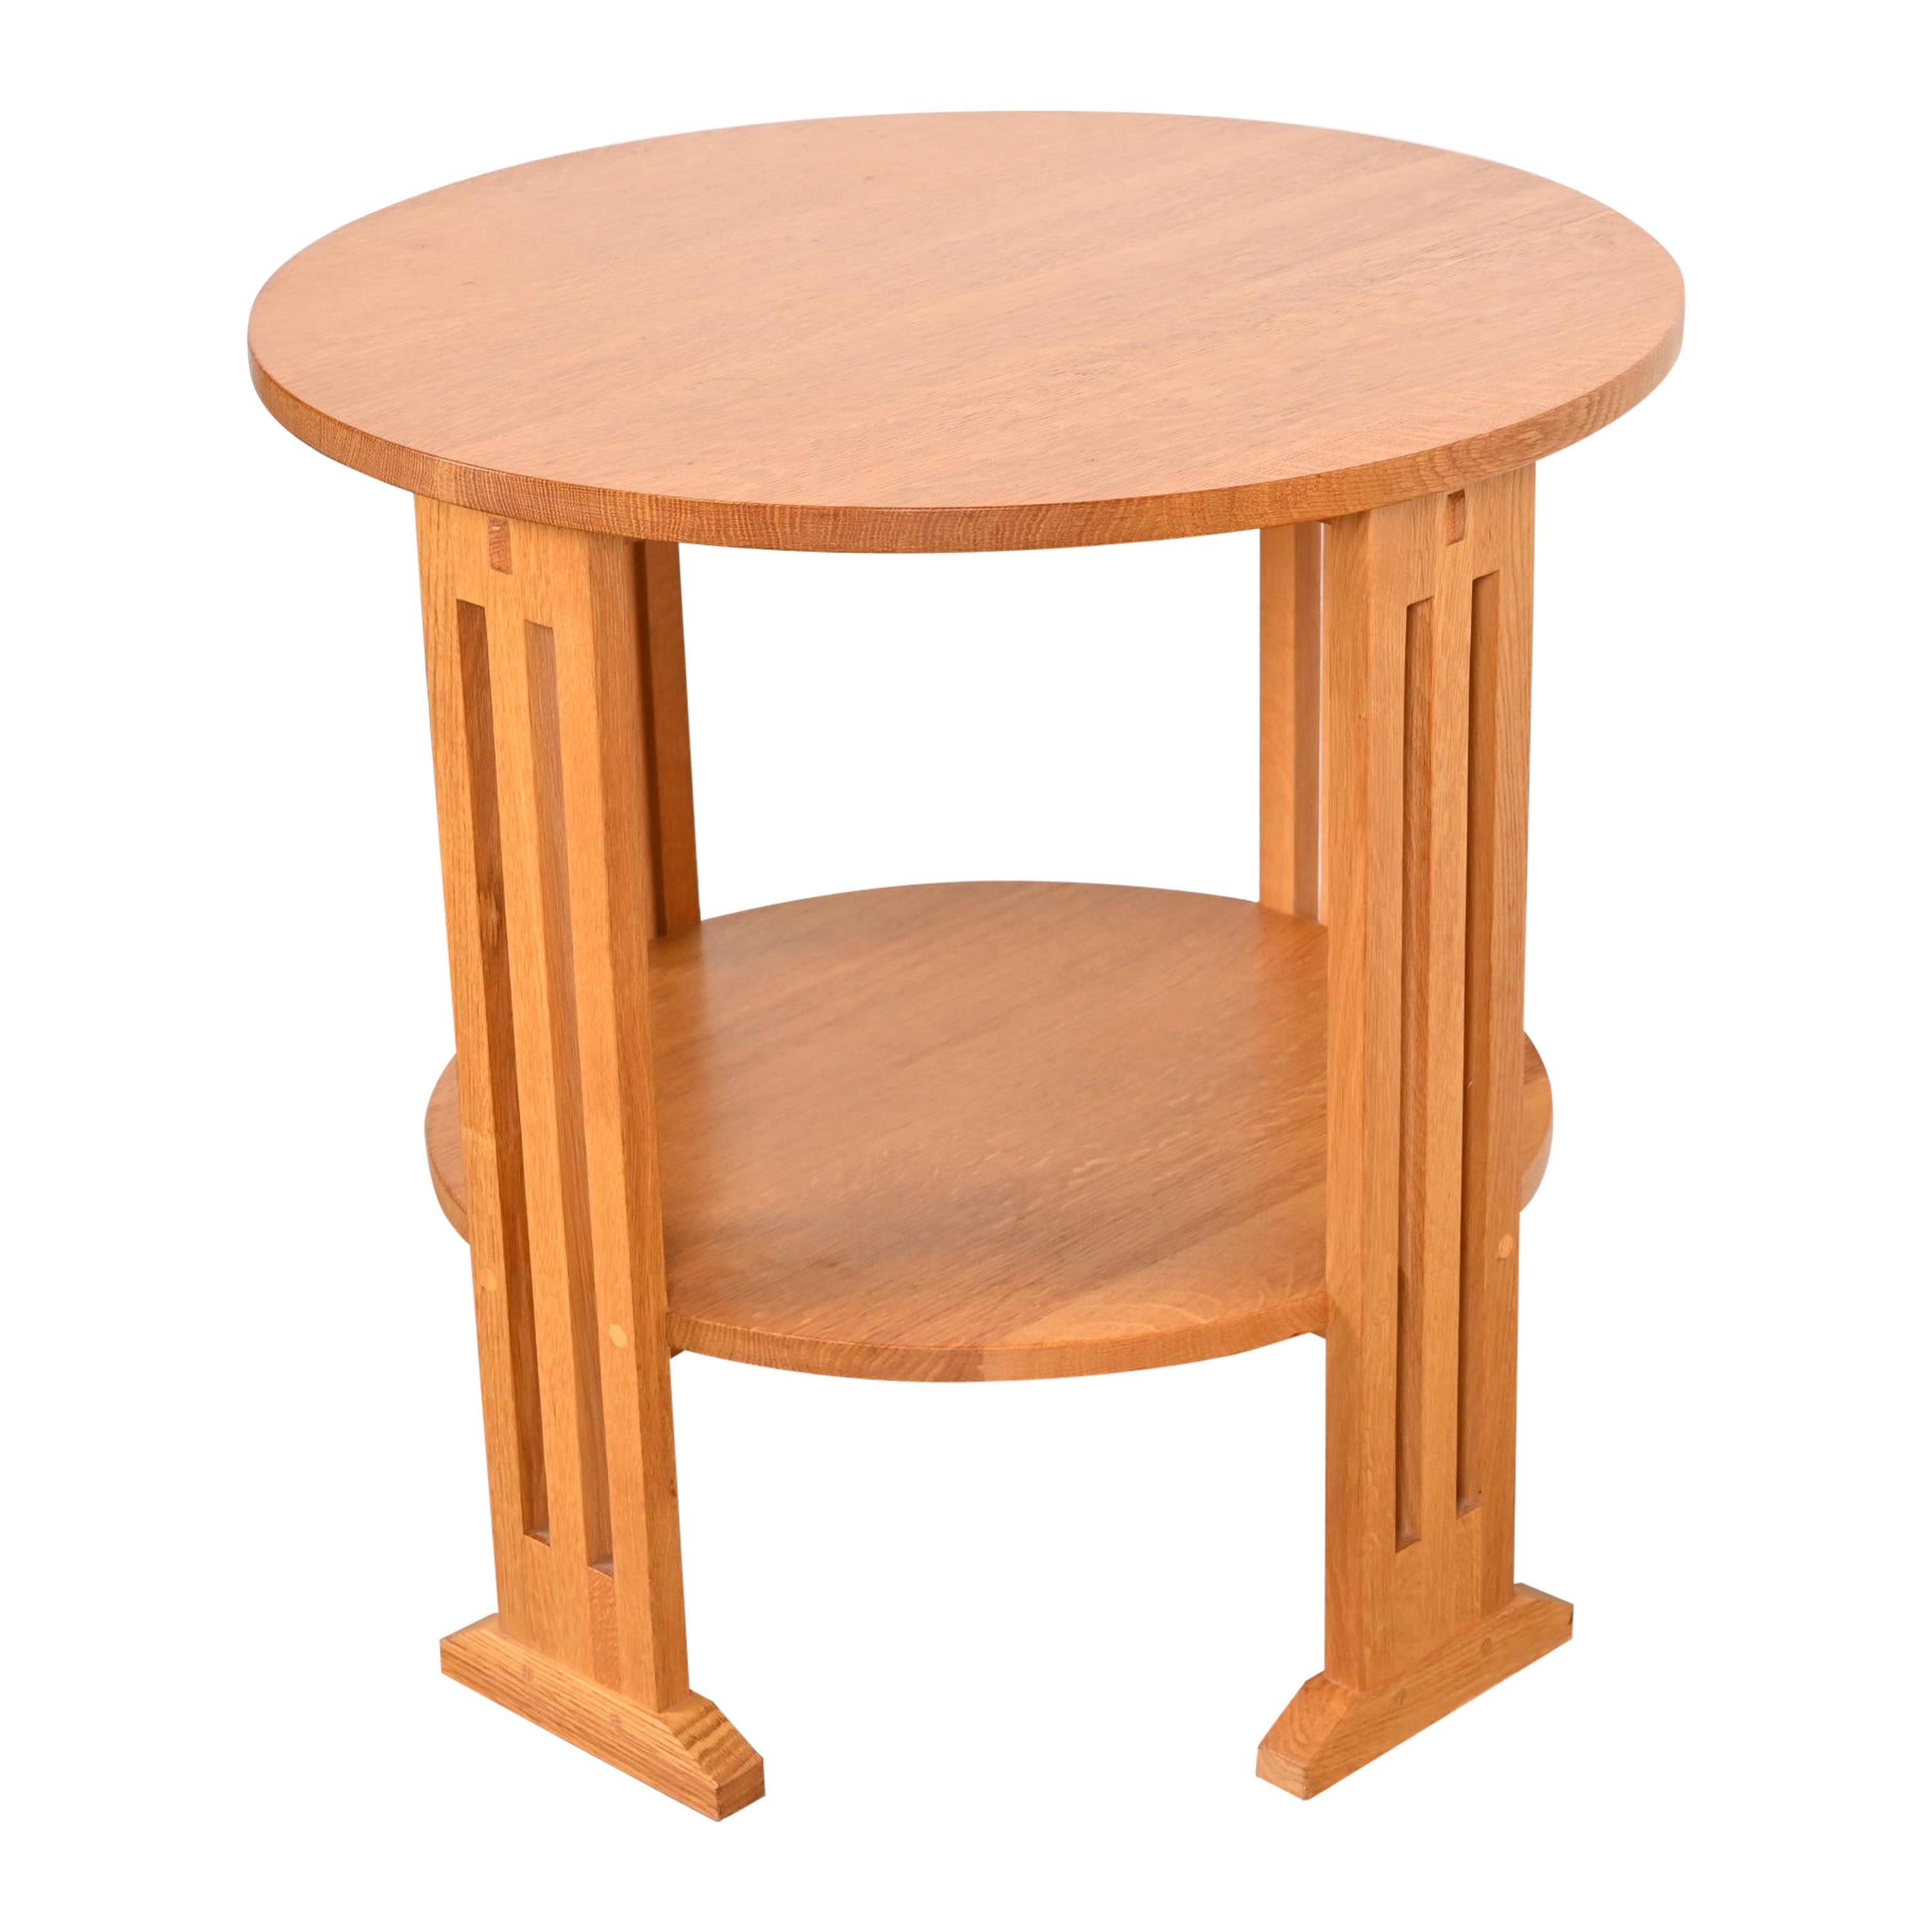 Stickley Mission Oak Arts & Crafts Center Table or Occasional Side Table